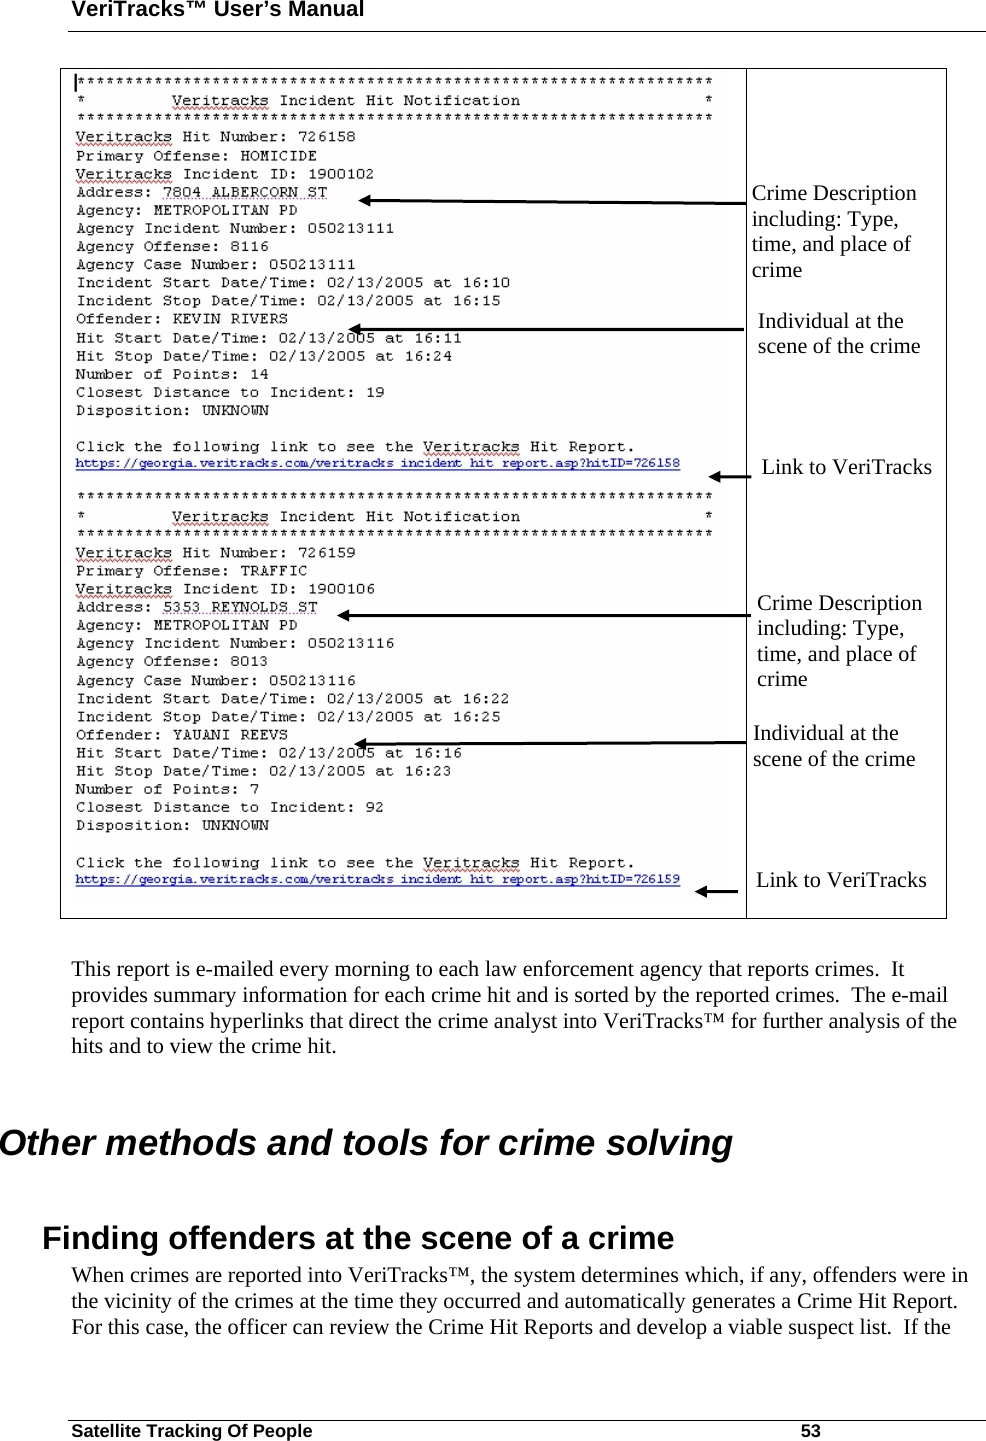 VeriTracks™ User’s Manual Satellite Tracking Of People       53     This report is e-mailed every morning to each law enforcement agency that reports crimes.  It provides summary information for each crime hit and is sorted by the reported crimes.  The e-mail report contains hyperlinks that direct the crime analyst into VeriTracks™ for further analysis of the hits and to view the crime hit.  Other methods and tools for crime solving  Finding offenders at the scene of a crime When crimes are reported into VeriTracks™, the system determines which, if any, offenders were in the vicinity of the crimes at the time they occurred and automatically generates a Crime Hit Report. For this case, the officer can review the Crime Hit Reports and develop a viable suspect list.  If the Crime Description including: Type, time, and place of crime Individual at the scene of the crime Link to VeriTracks Crime Description including: Type, time, and place of crime Individual at the scene of the crime Link to VeriTracks 